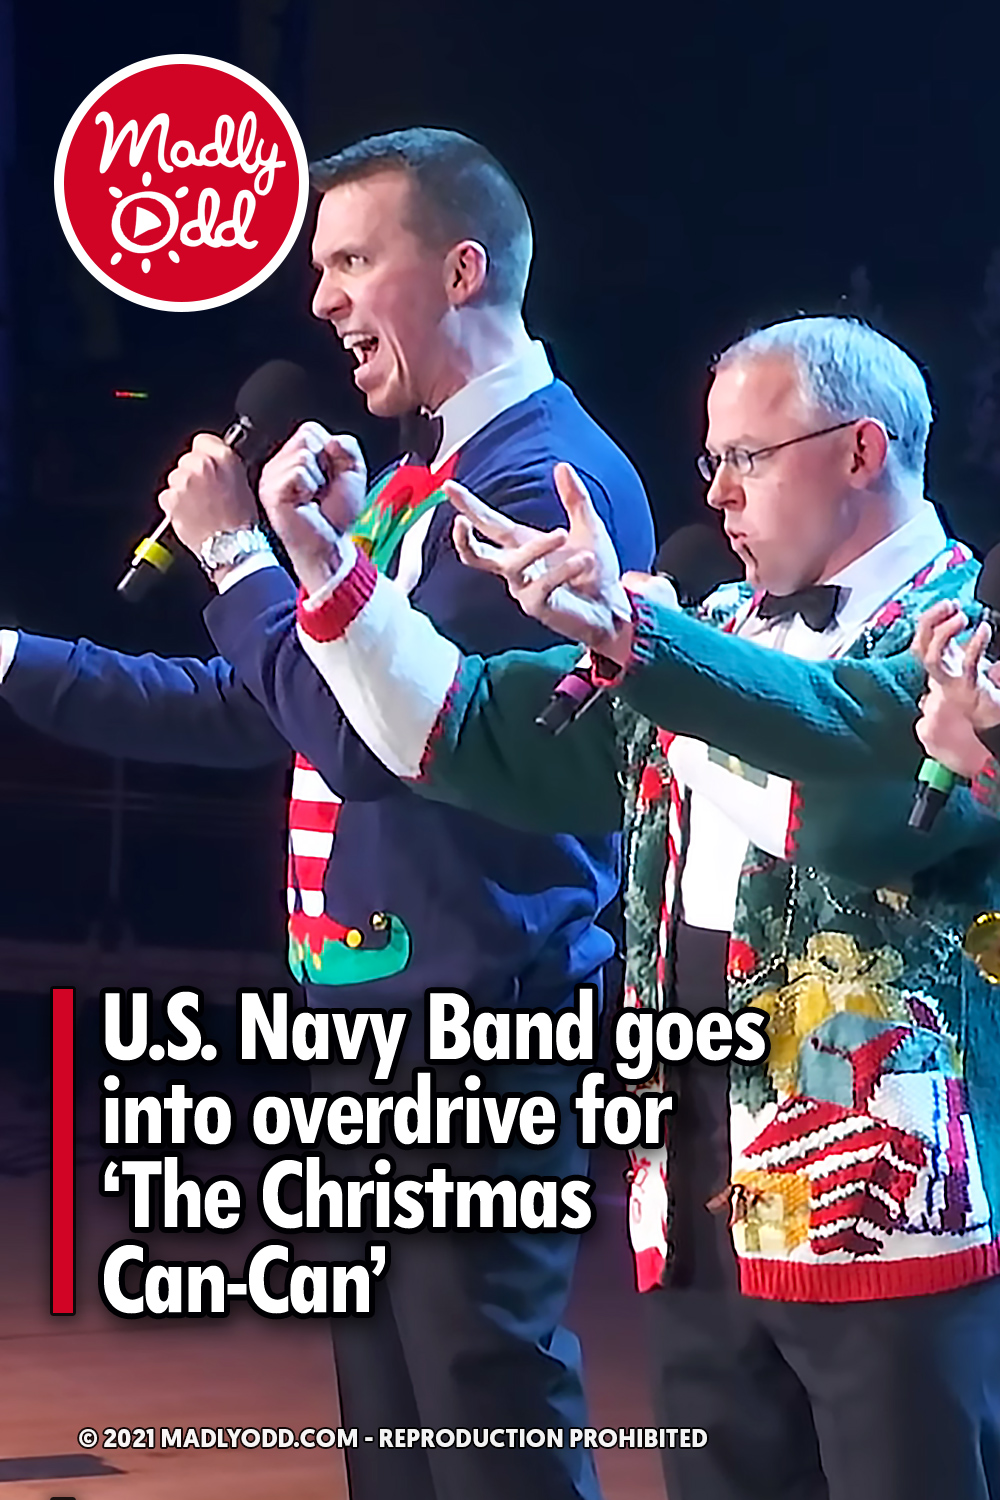 U.S. Navy Band goes into overdrive for ‘The Christmas Can-Can’